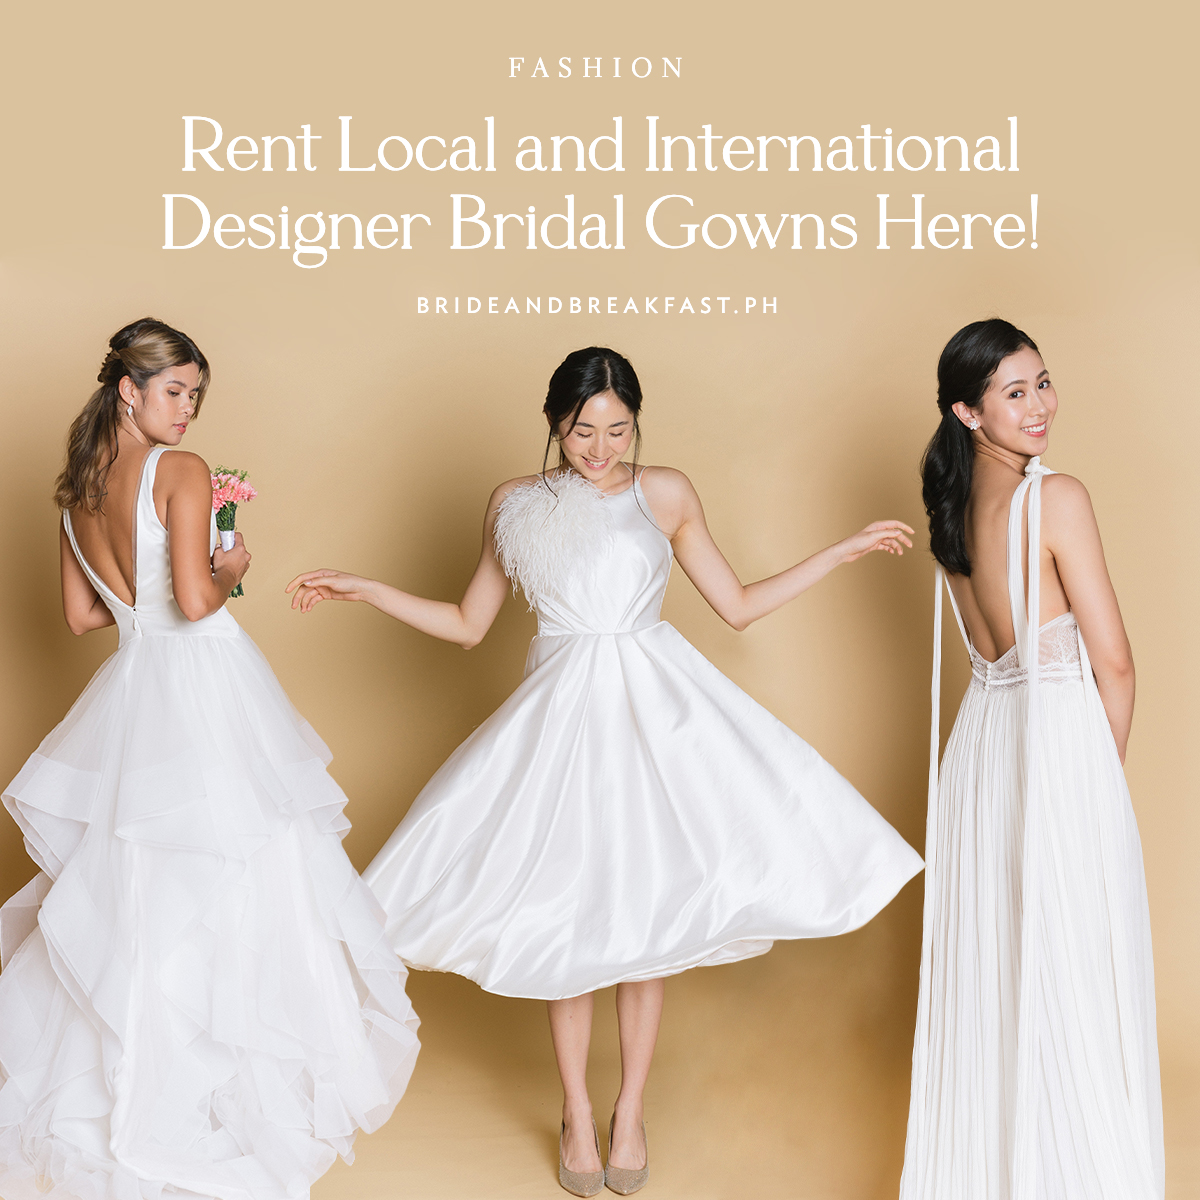 Rent Local and International Designer Bridal Gowns Here!